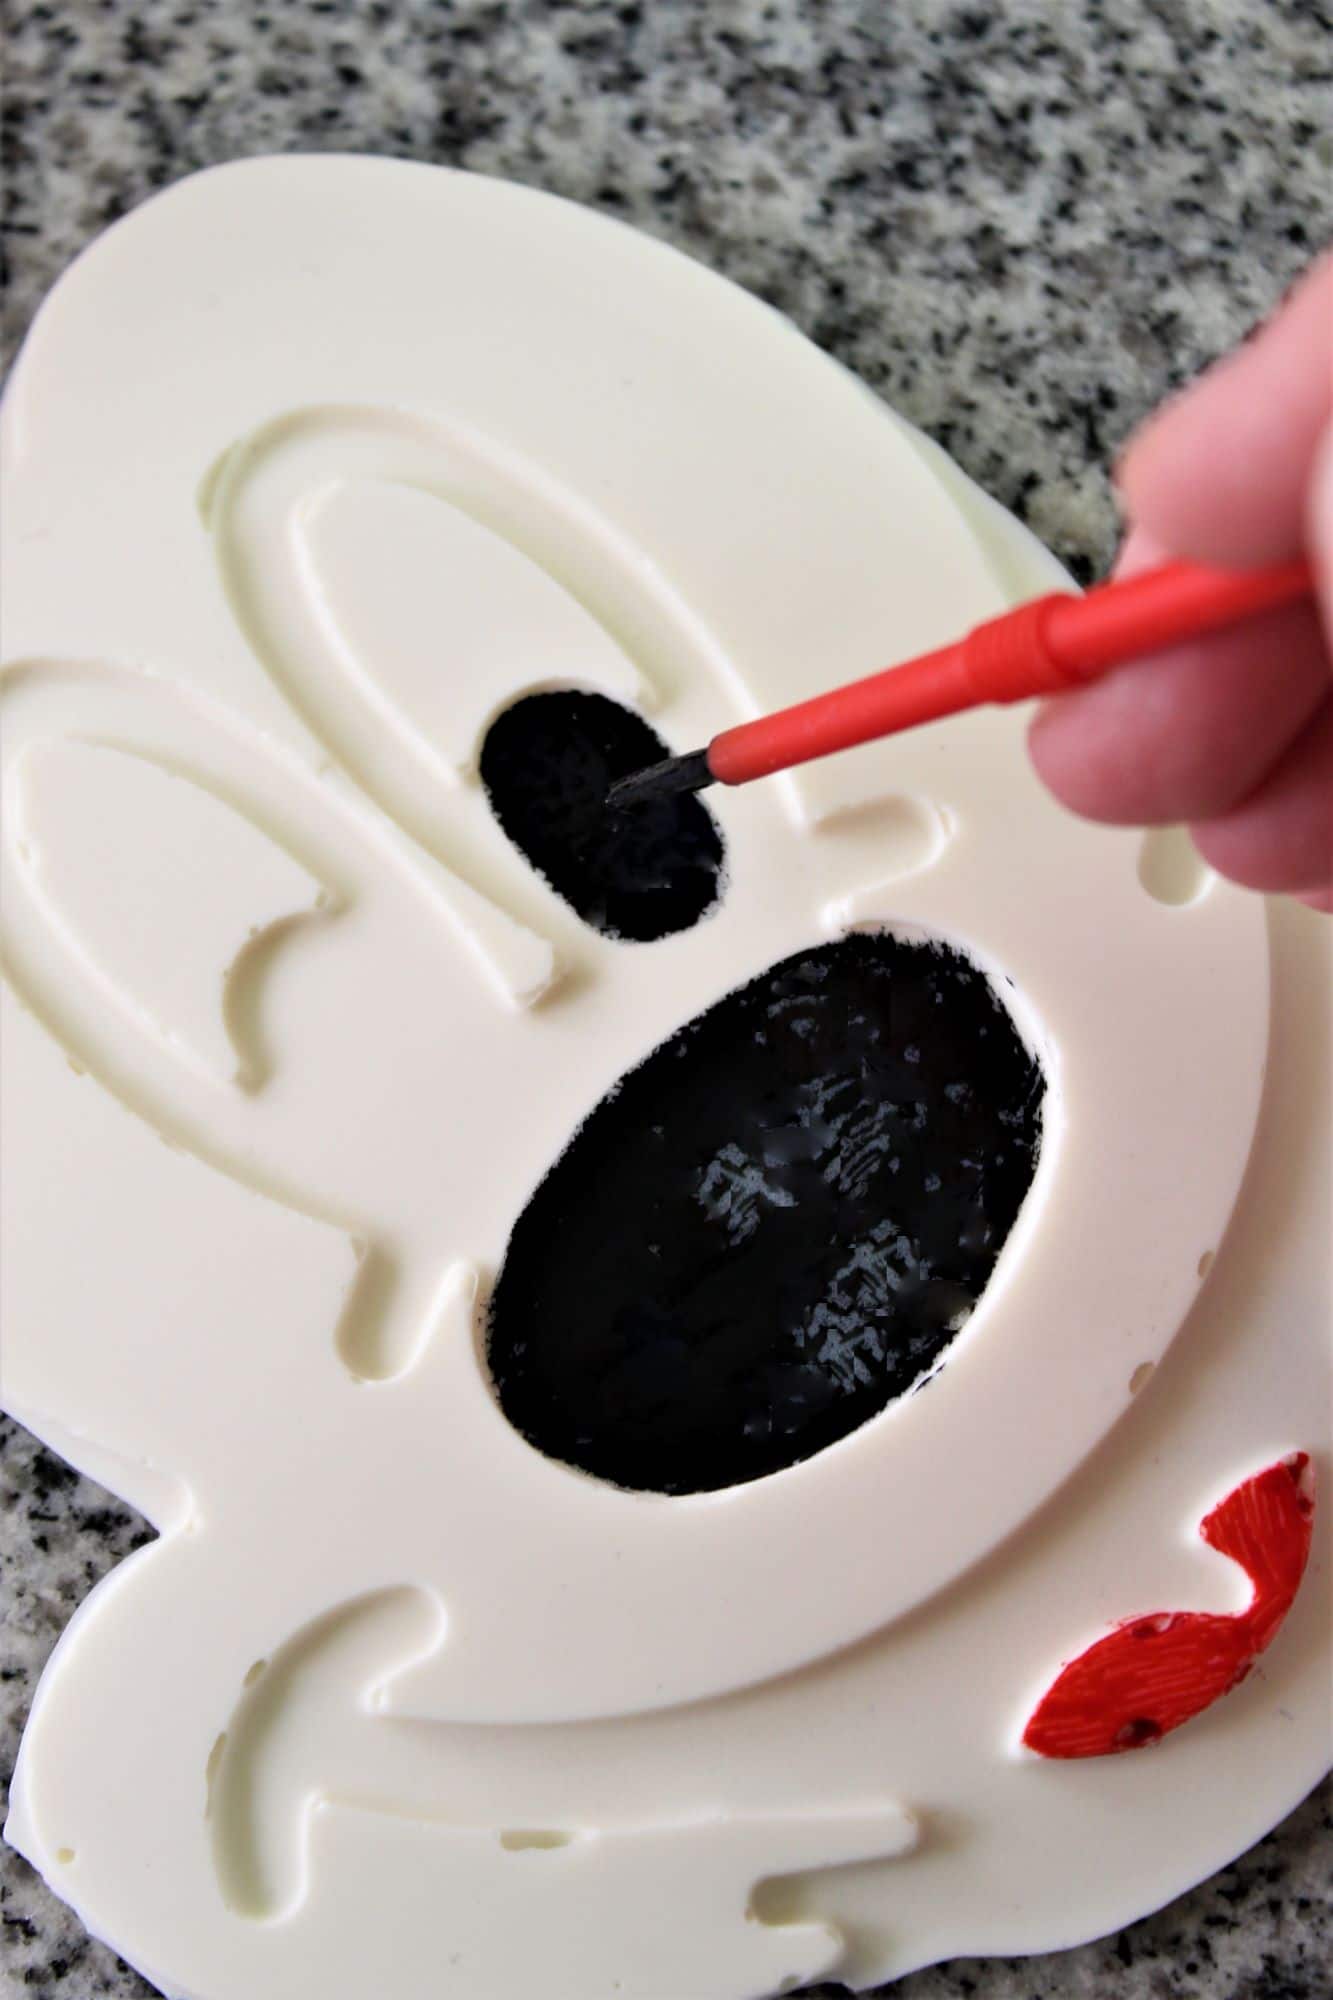 painting red and black gel food colors on the white chocolate mickey face.